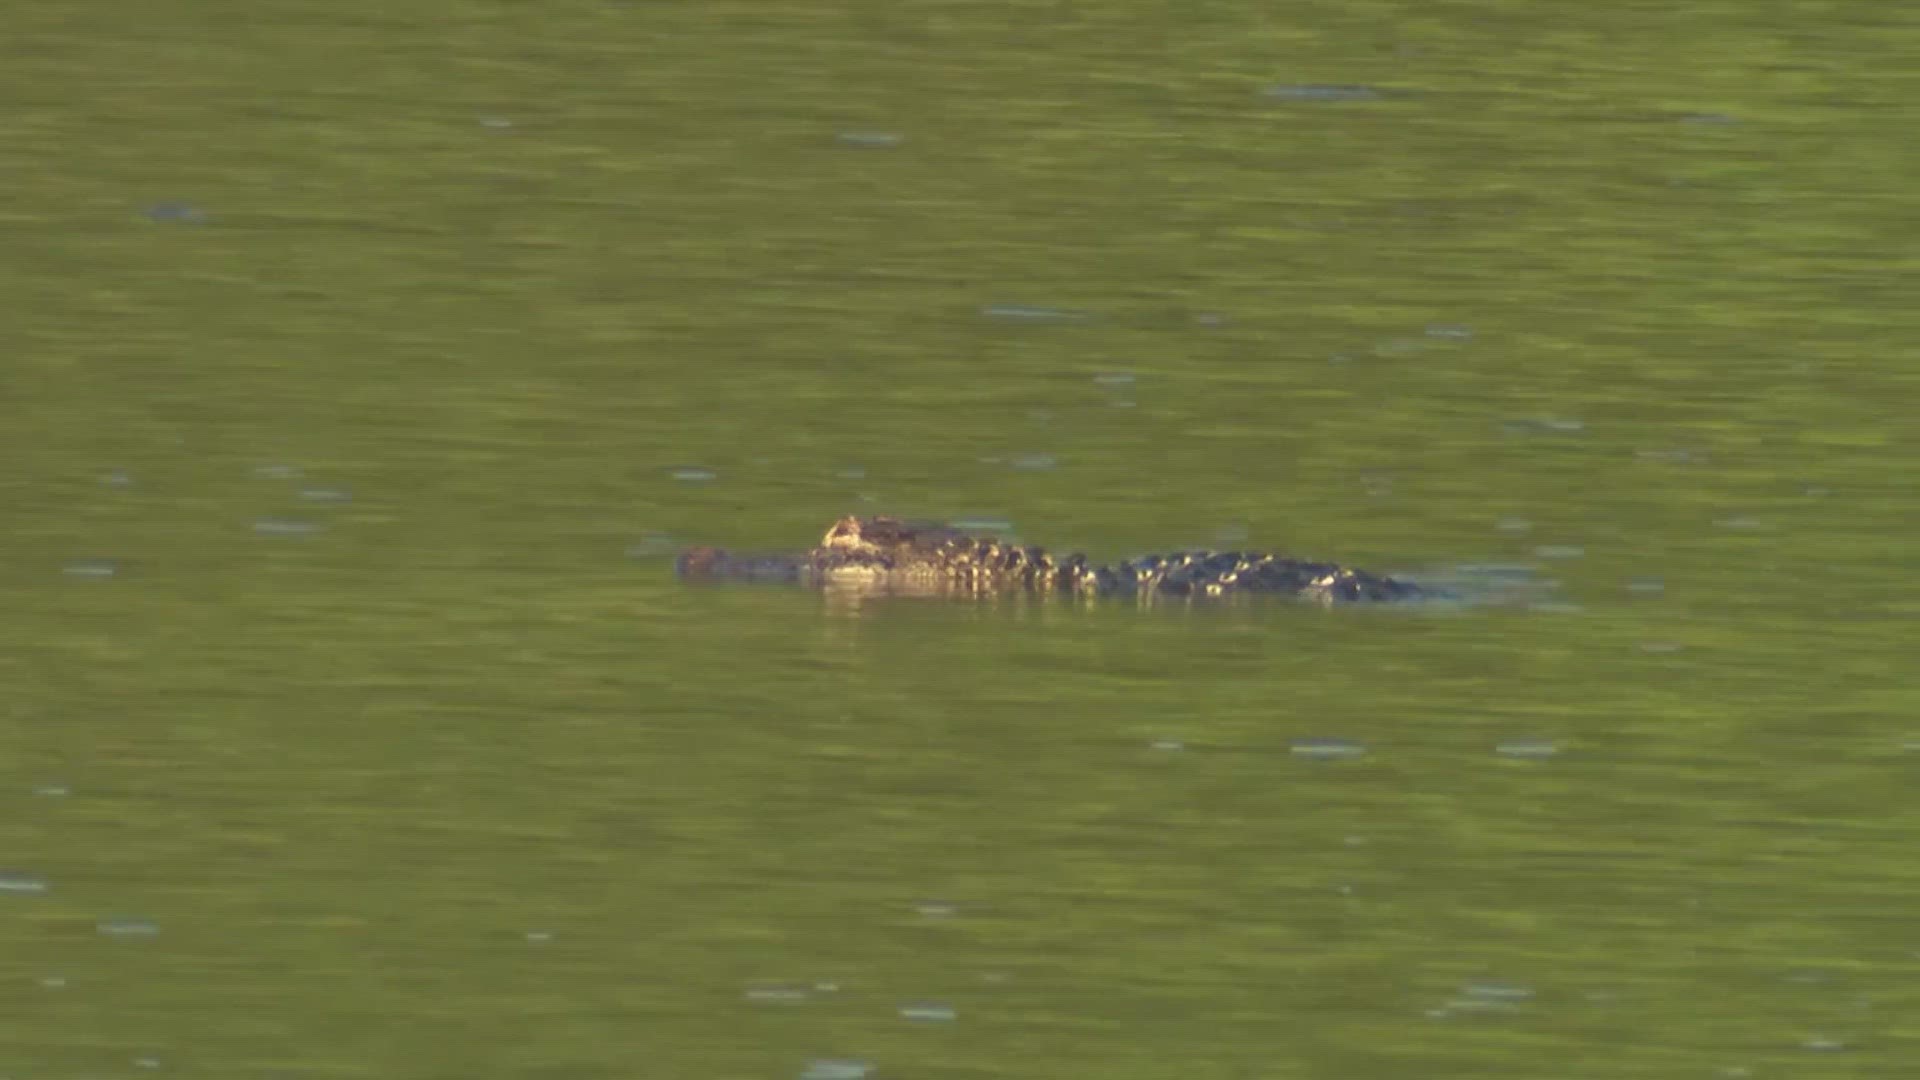 On Saturday, swimmers got the shock of their lives when they spotted a huge gator just feet away from them at Raven Lake.